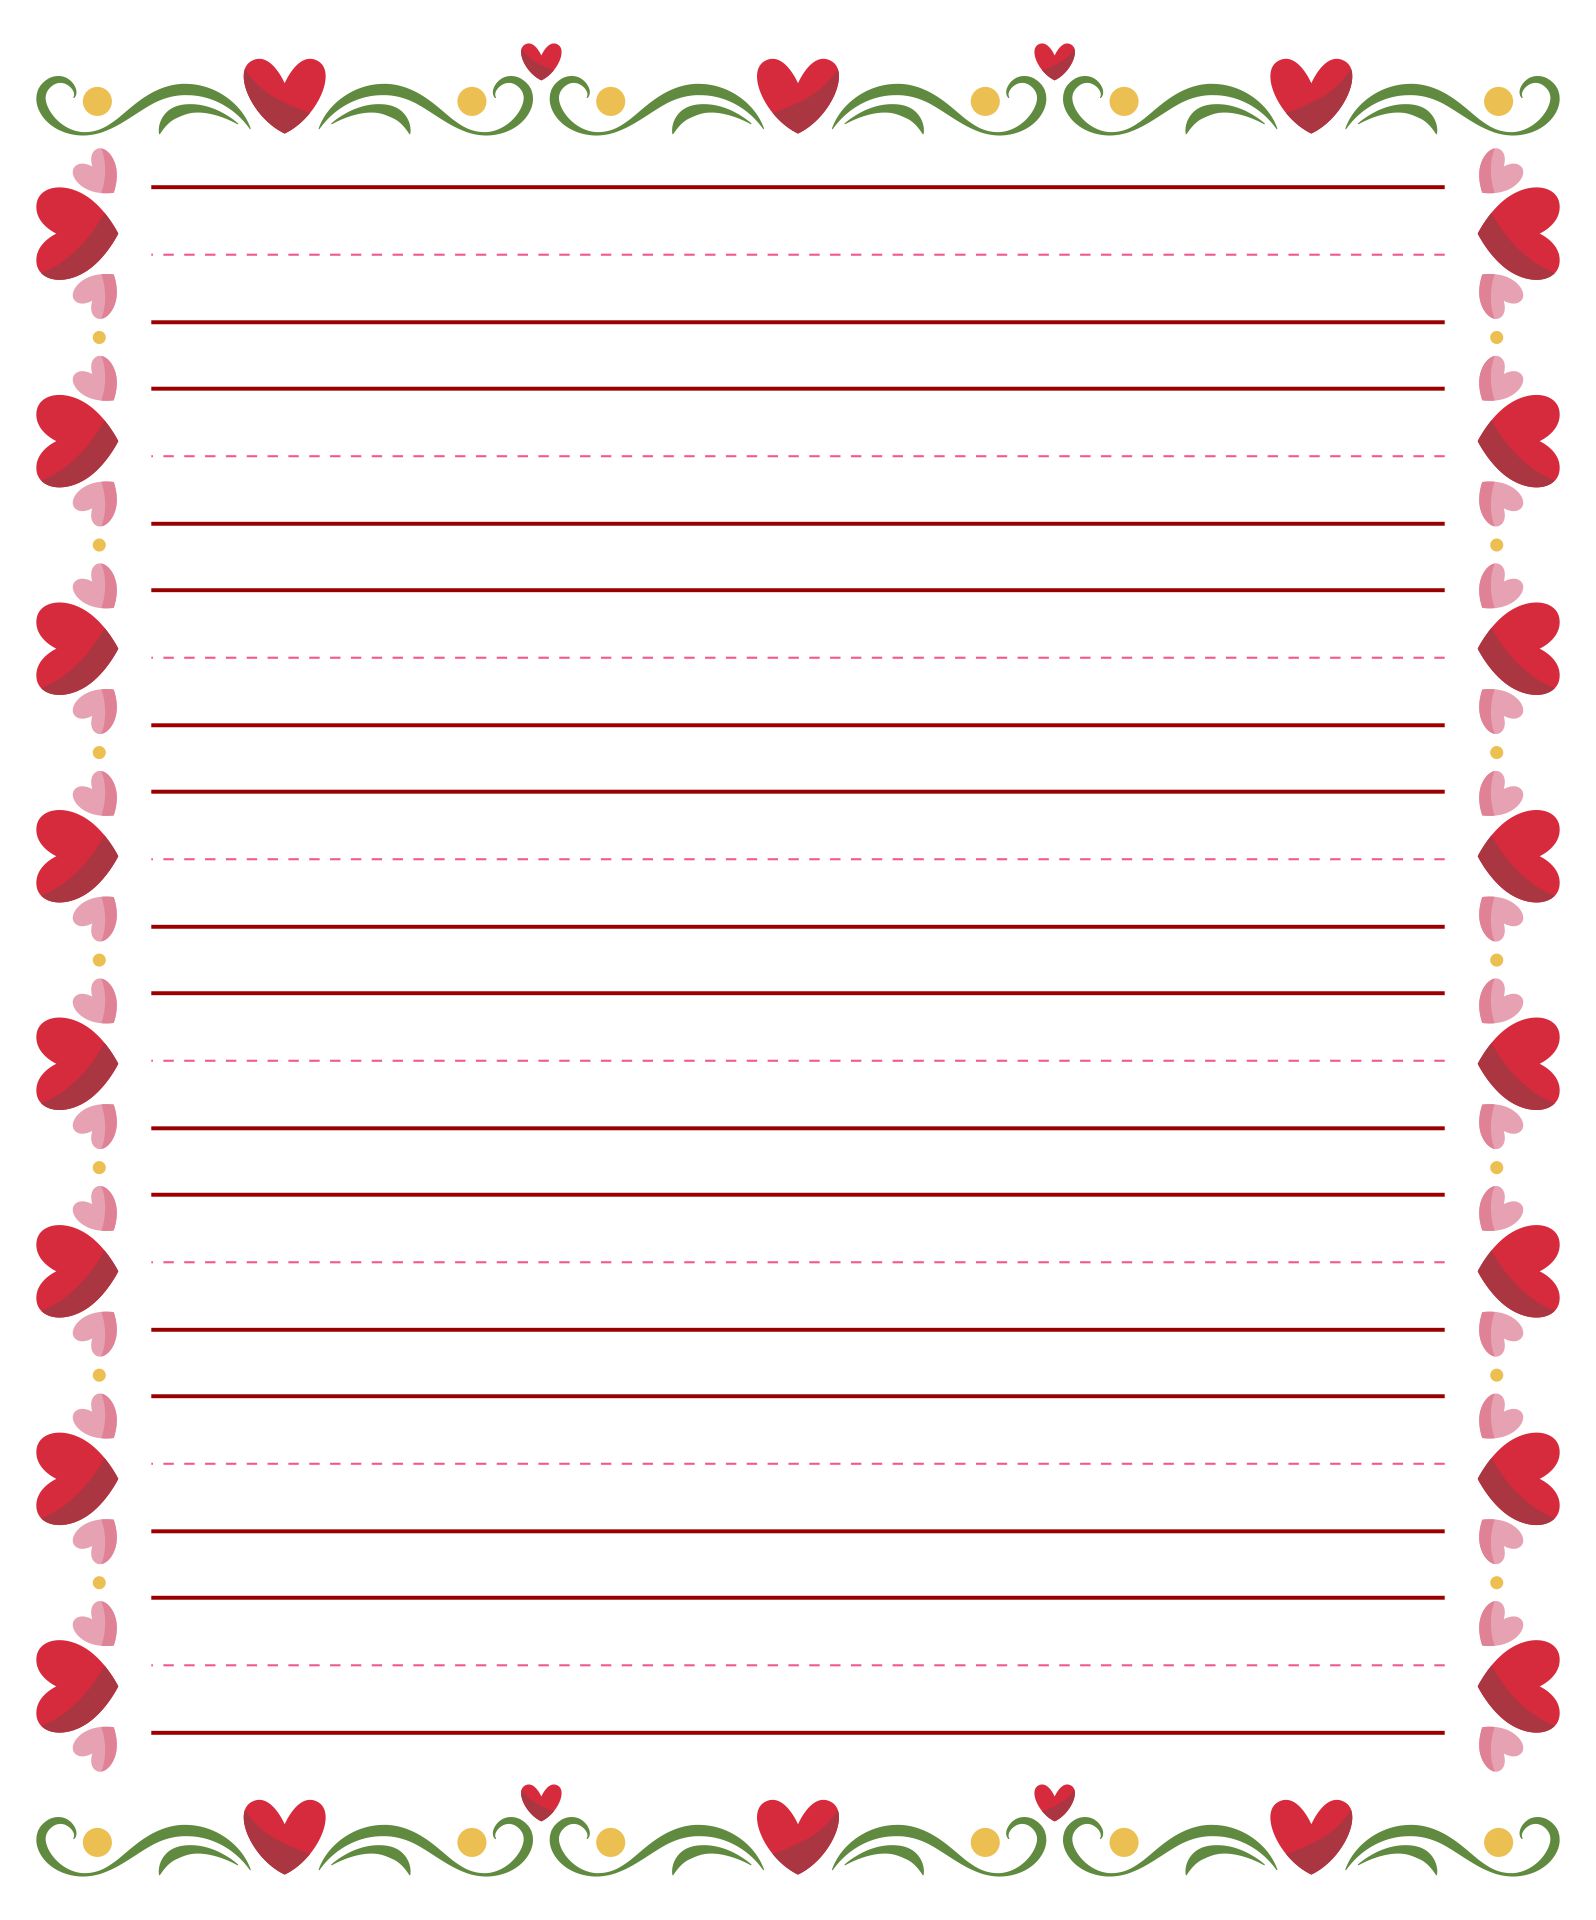 Lined Paper Printable With Border - Printable World Holiday